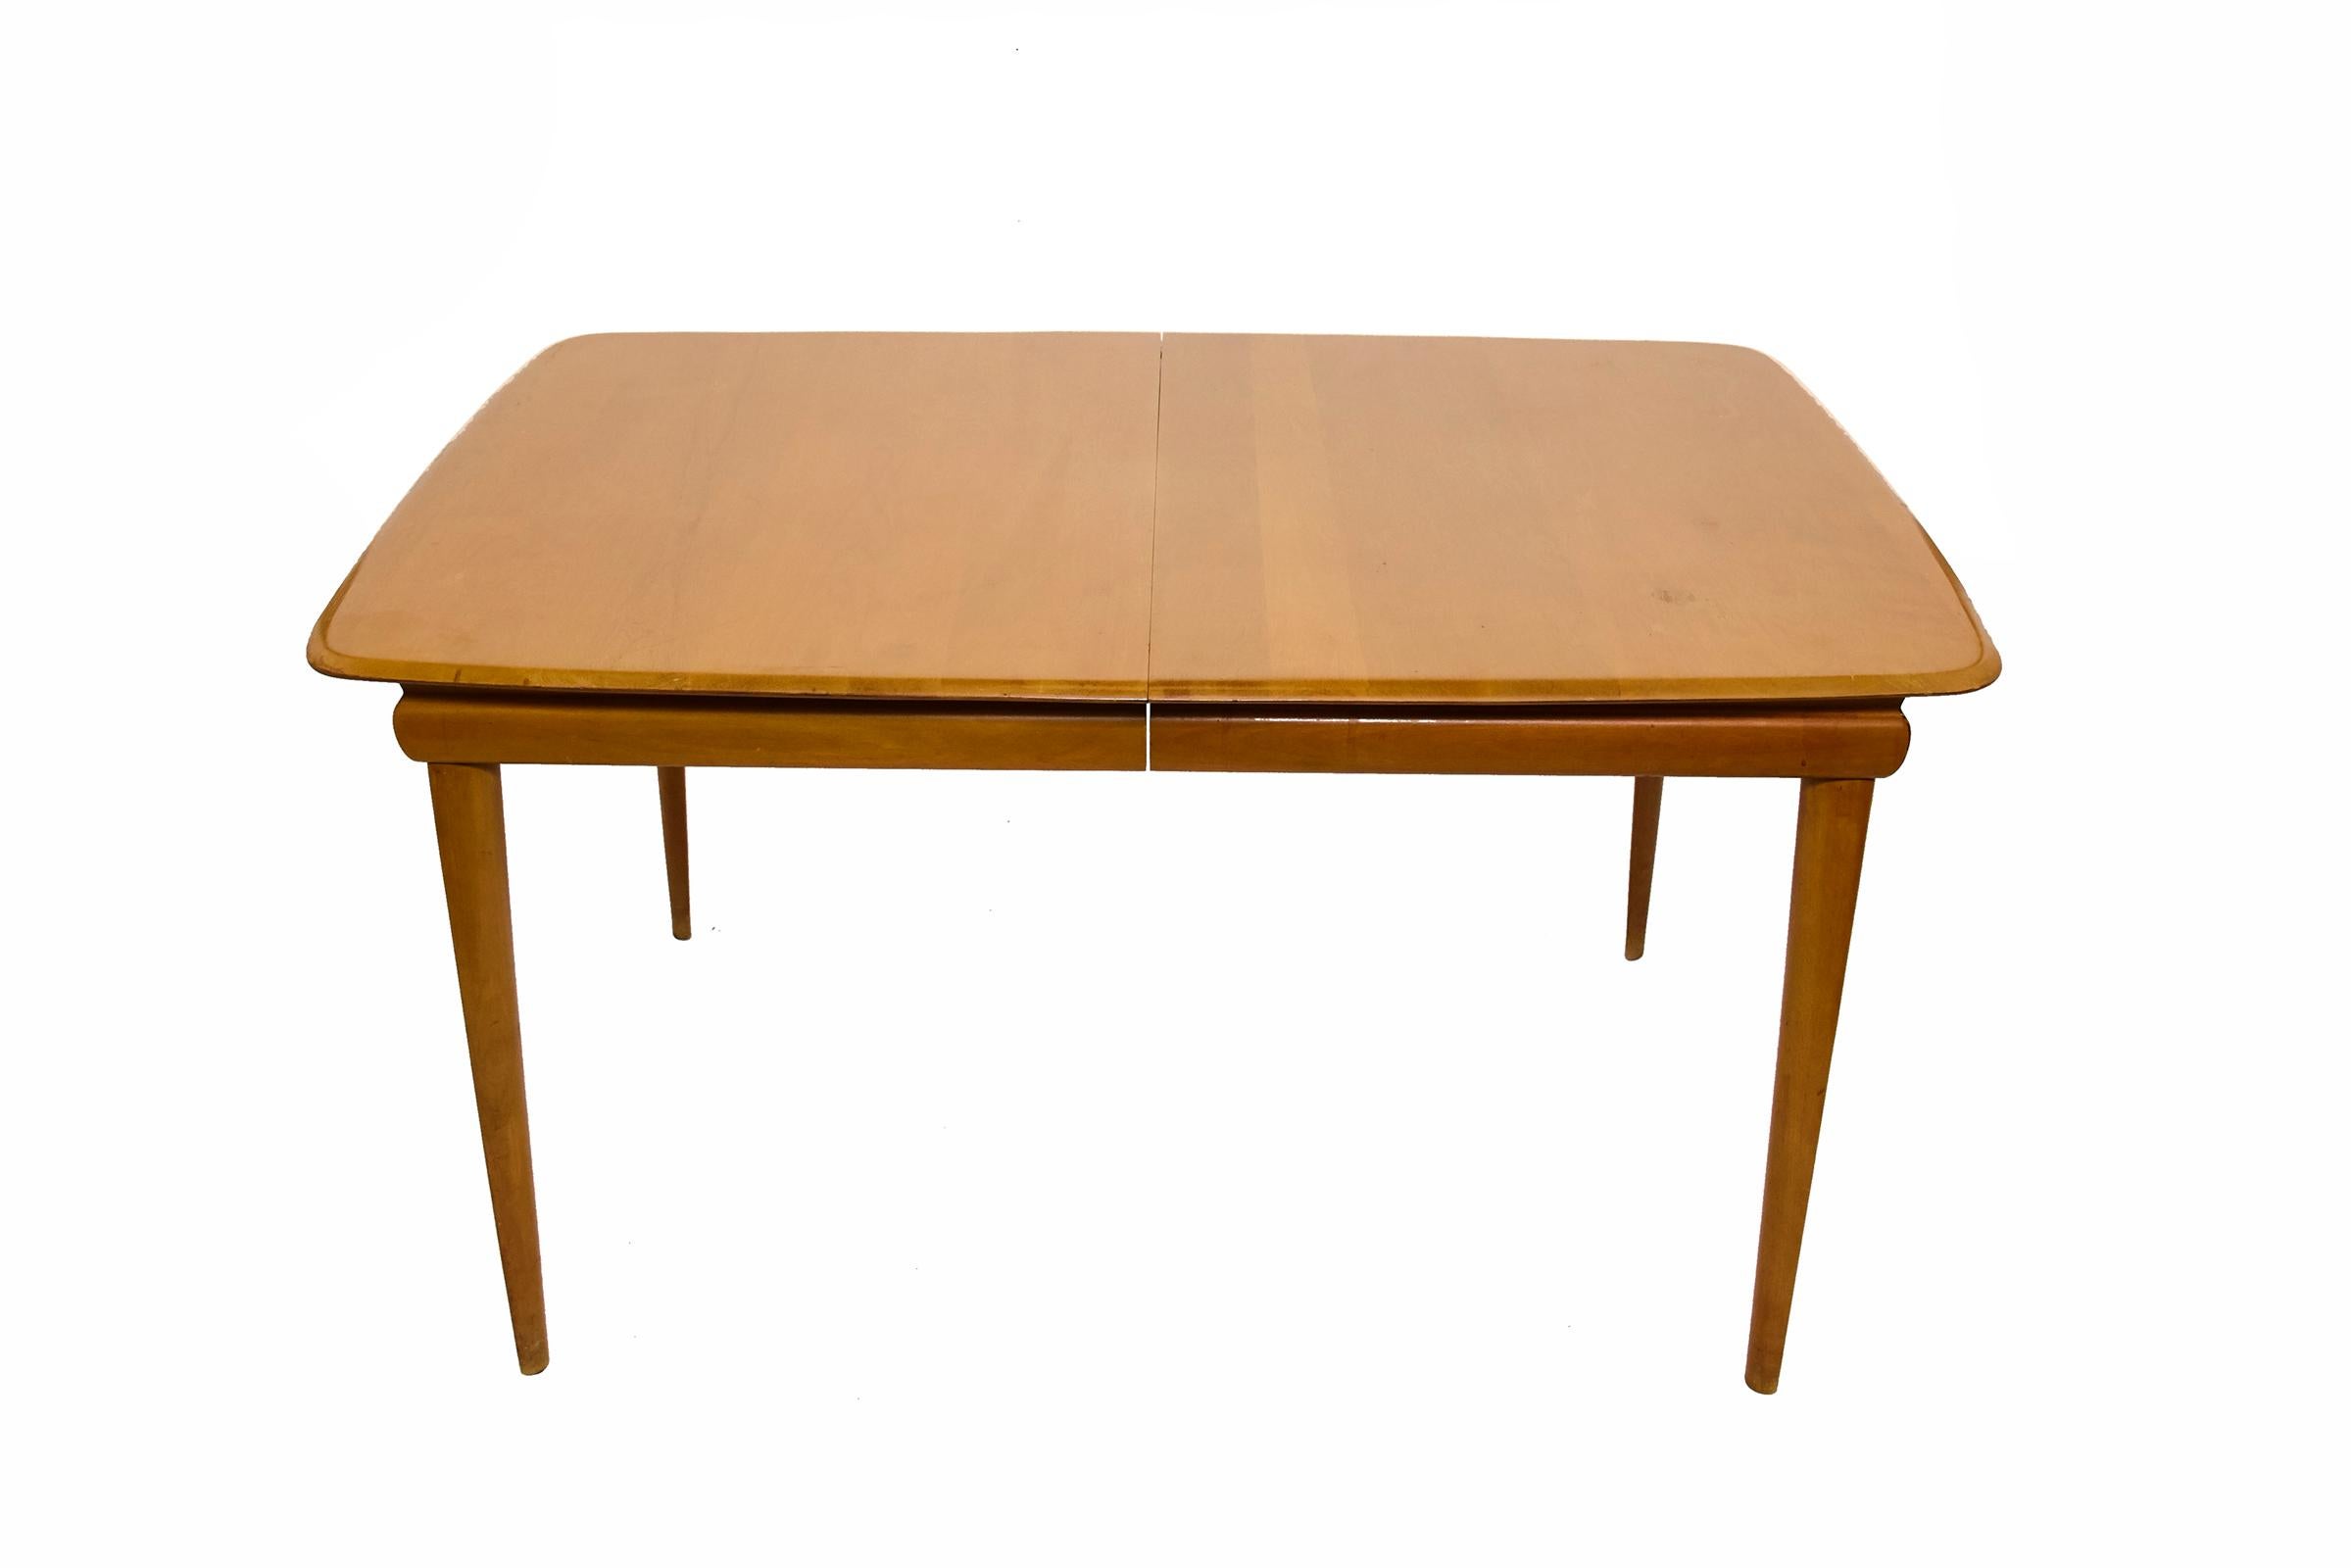 Amazing one family owned Heywood Wakefield Mid-Century Modern birch 'champagne' dining table and 6 dogbone chairs, 1950s. Sold as set, we are selling the credenza hutch combo separately in another listing. Table has 1 leaf (not shown in photo) and